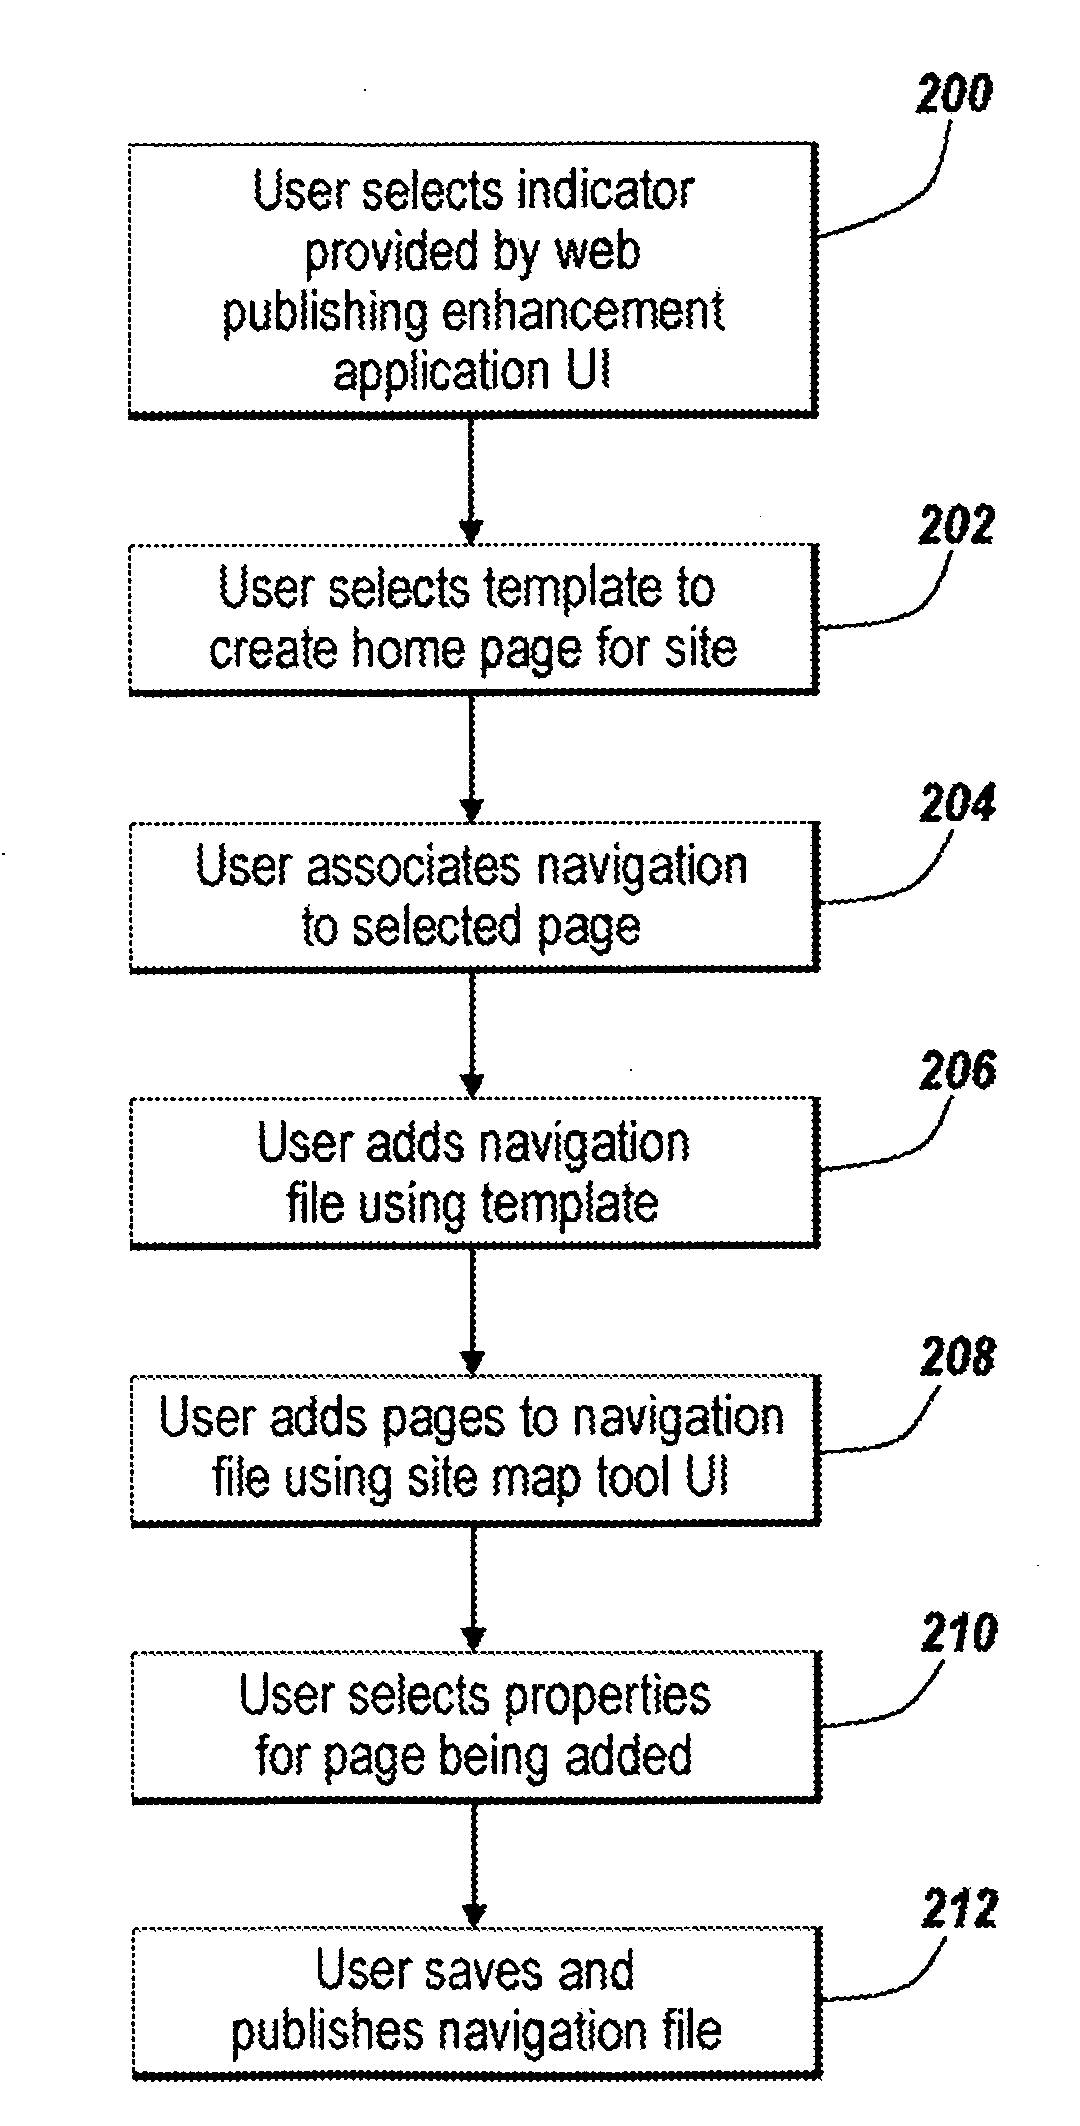 System and method for website configuration and management